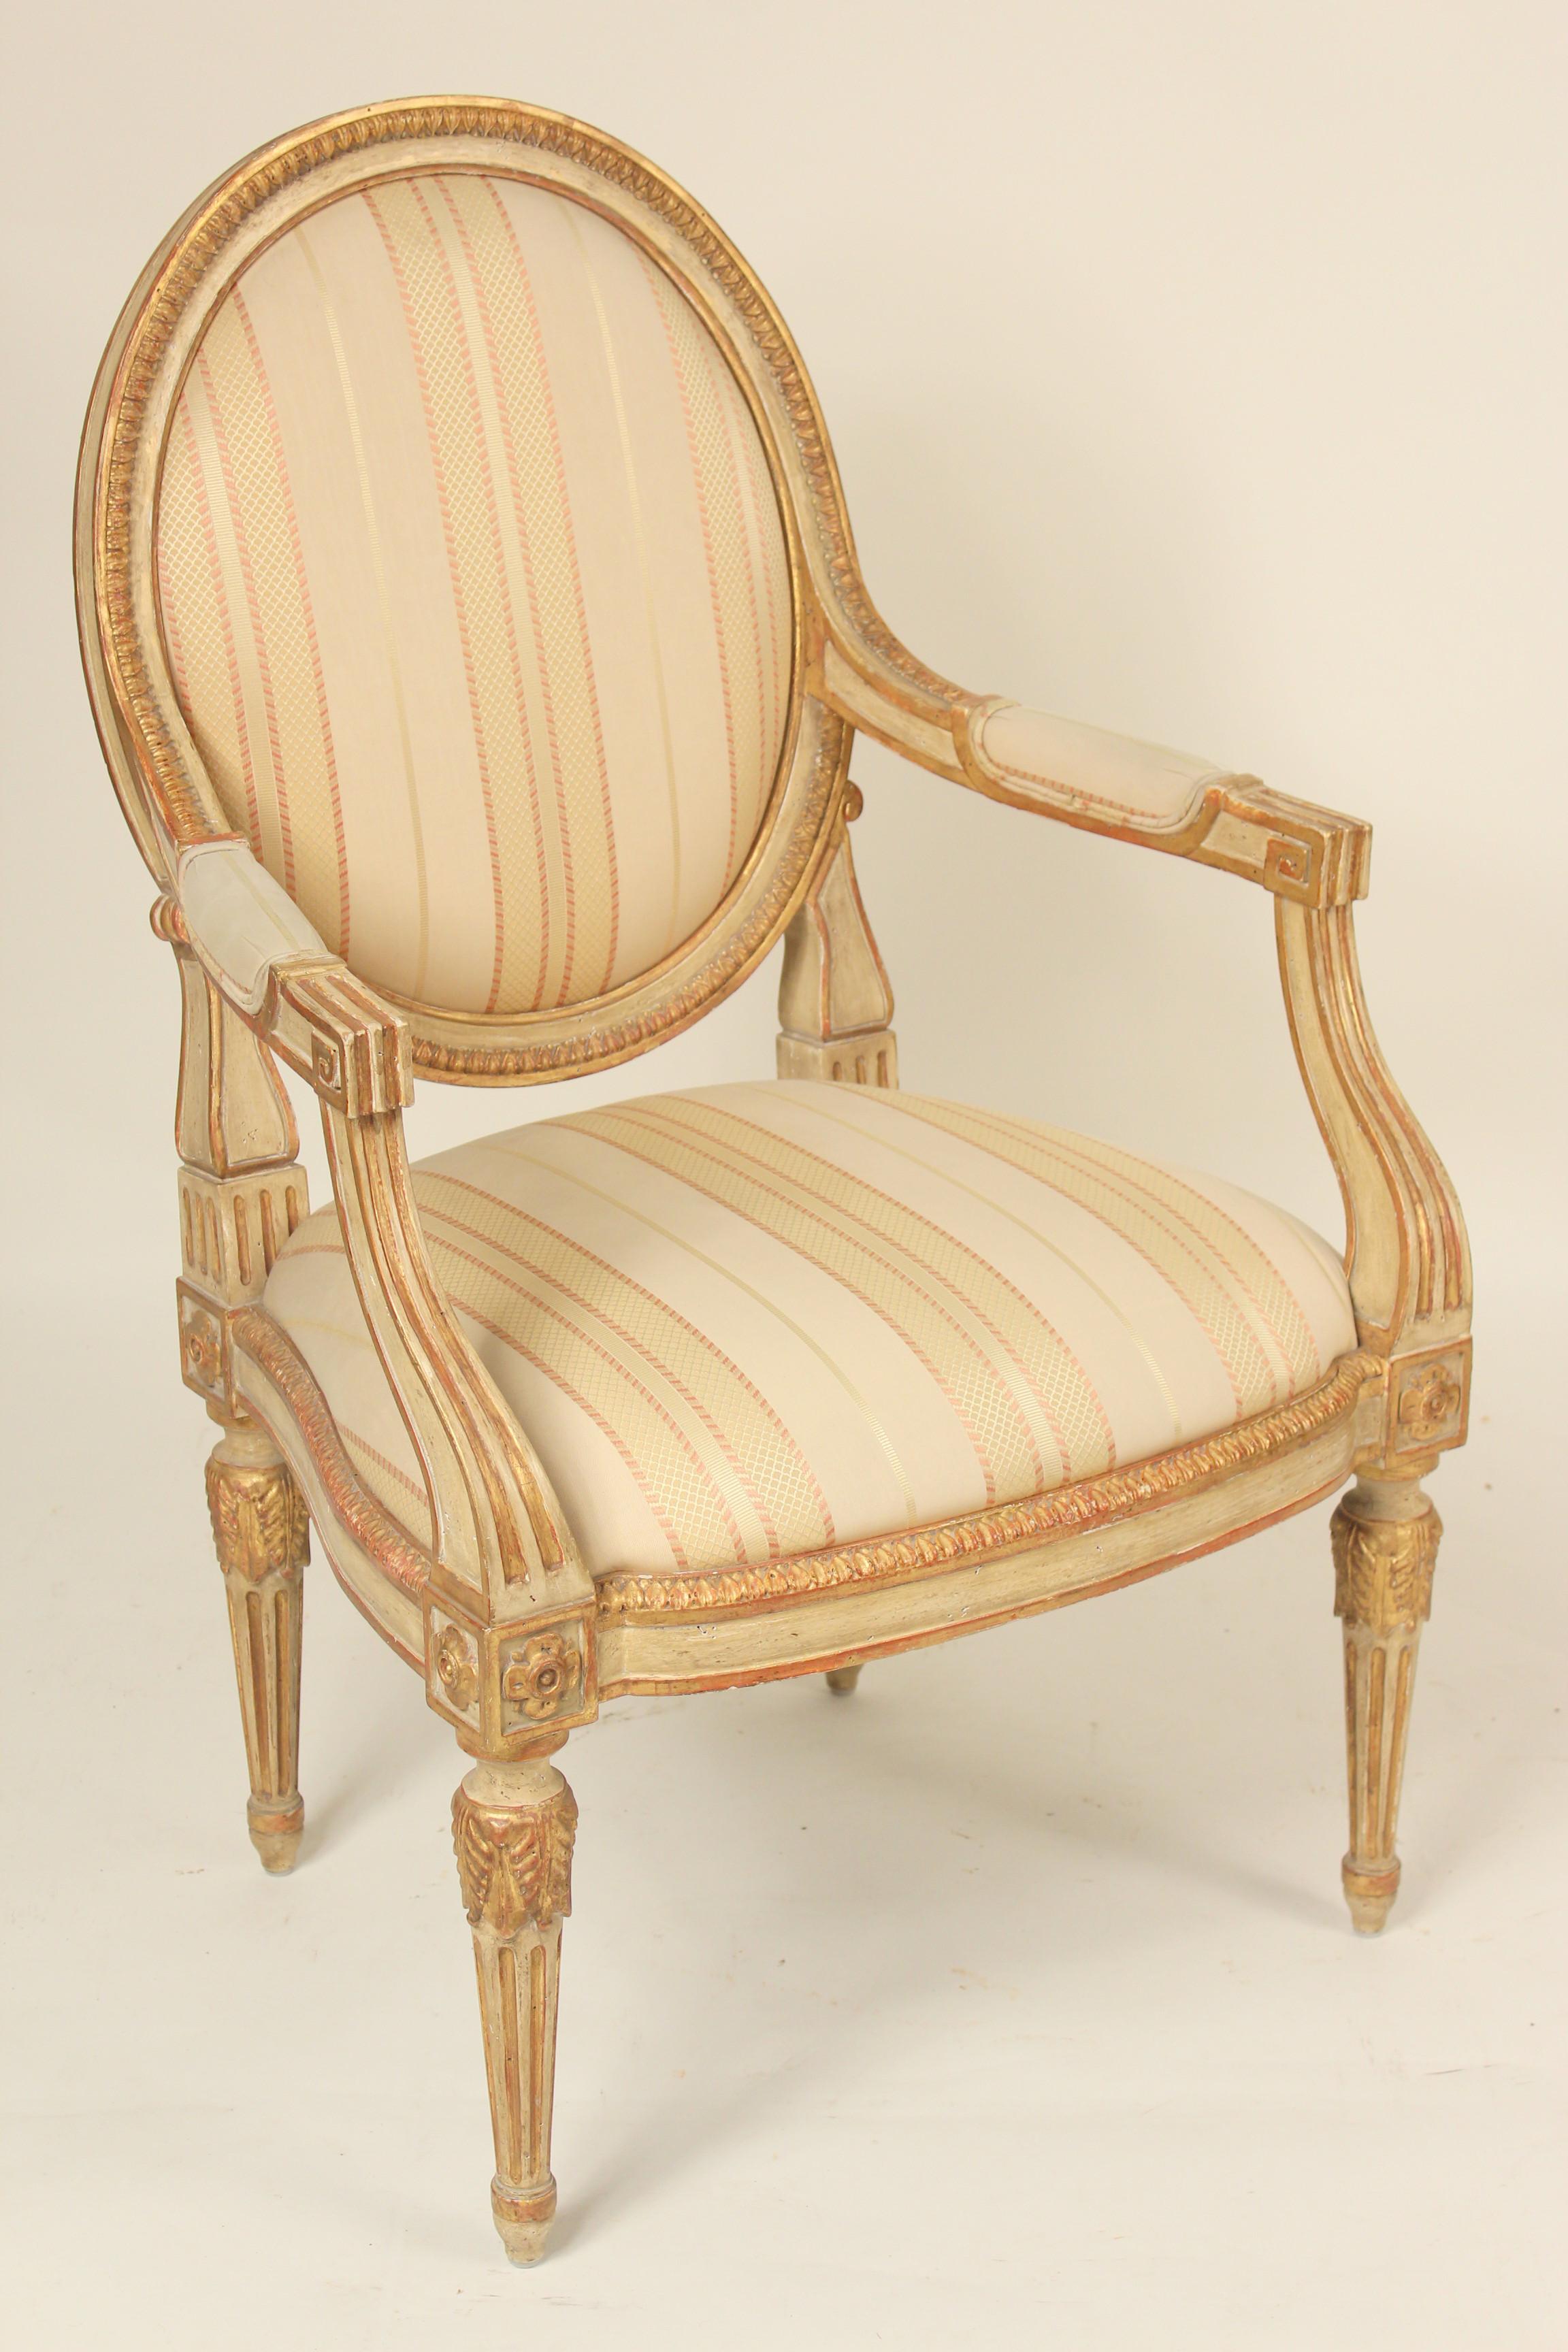 Pair of Dennis & Leen Louis XVI style painted and partial gilt armchairs, circa 1990-2000. These chairs have excellent quality gilded and painted surfaces and imitation worm holes.